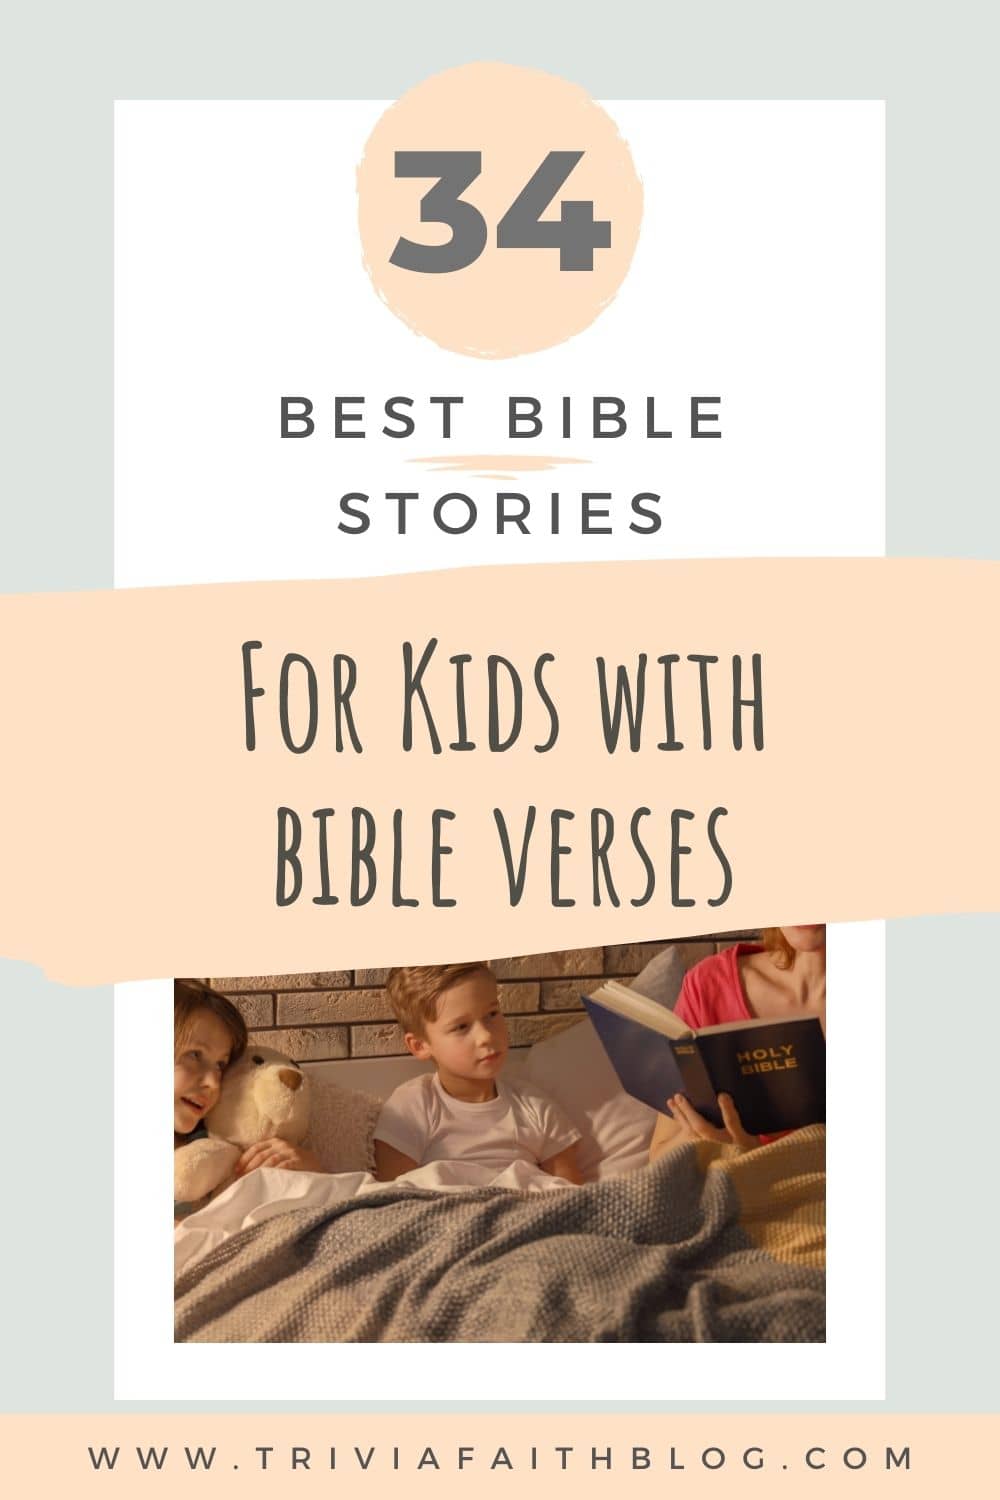 Best bible stories for kids